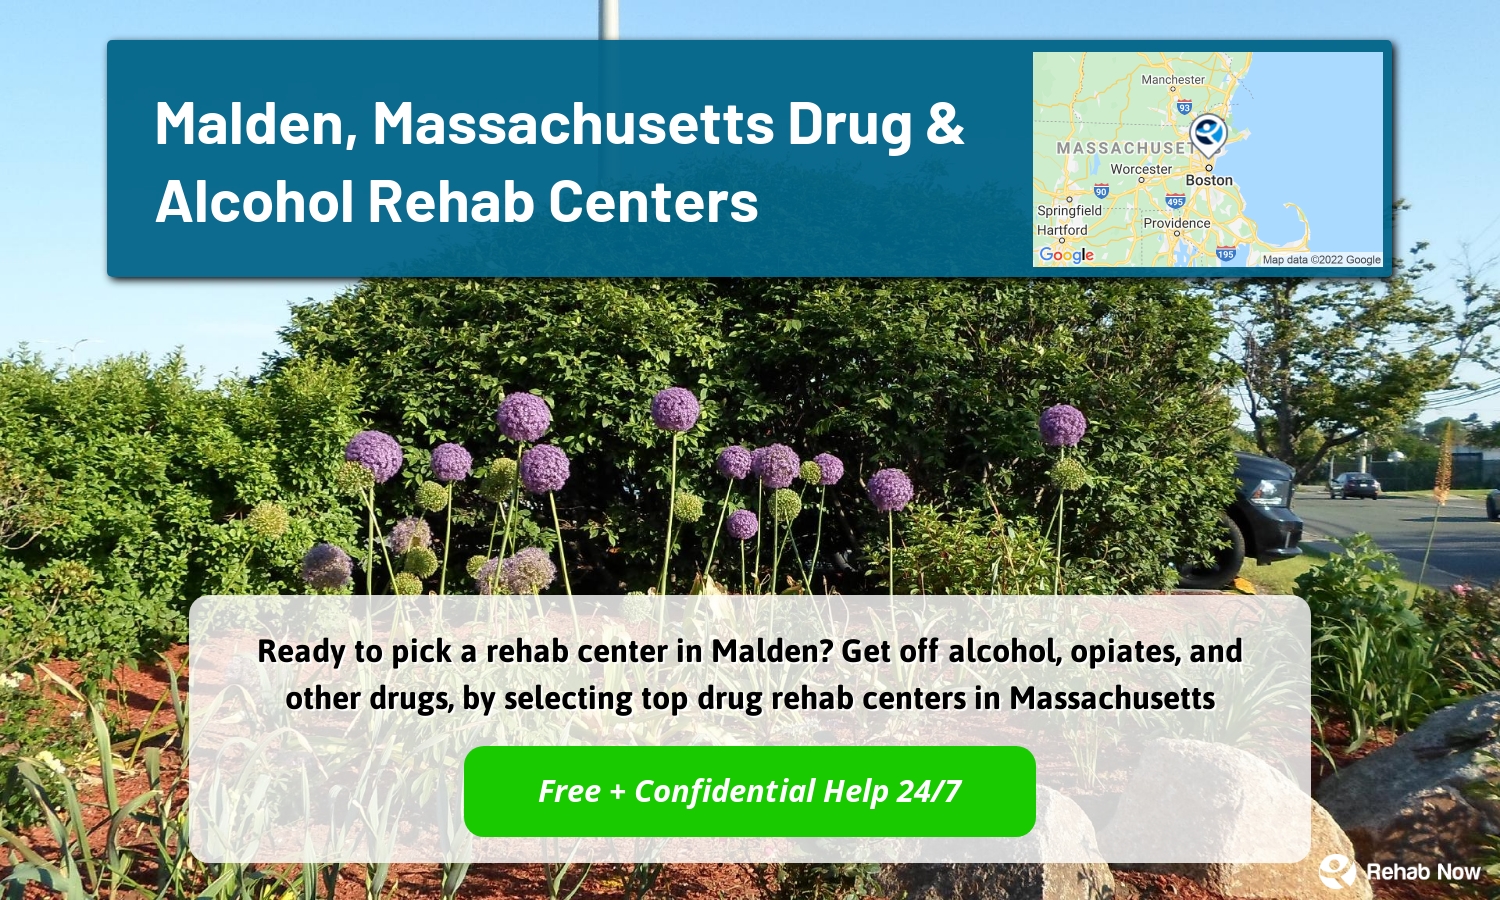 Ready to pick a rehab center in Malden? Get off alcohol, opiates, and other drugs, by selecting top drug rehab centers in Massachusetts